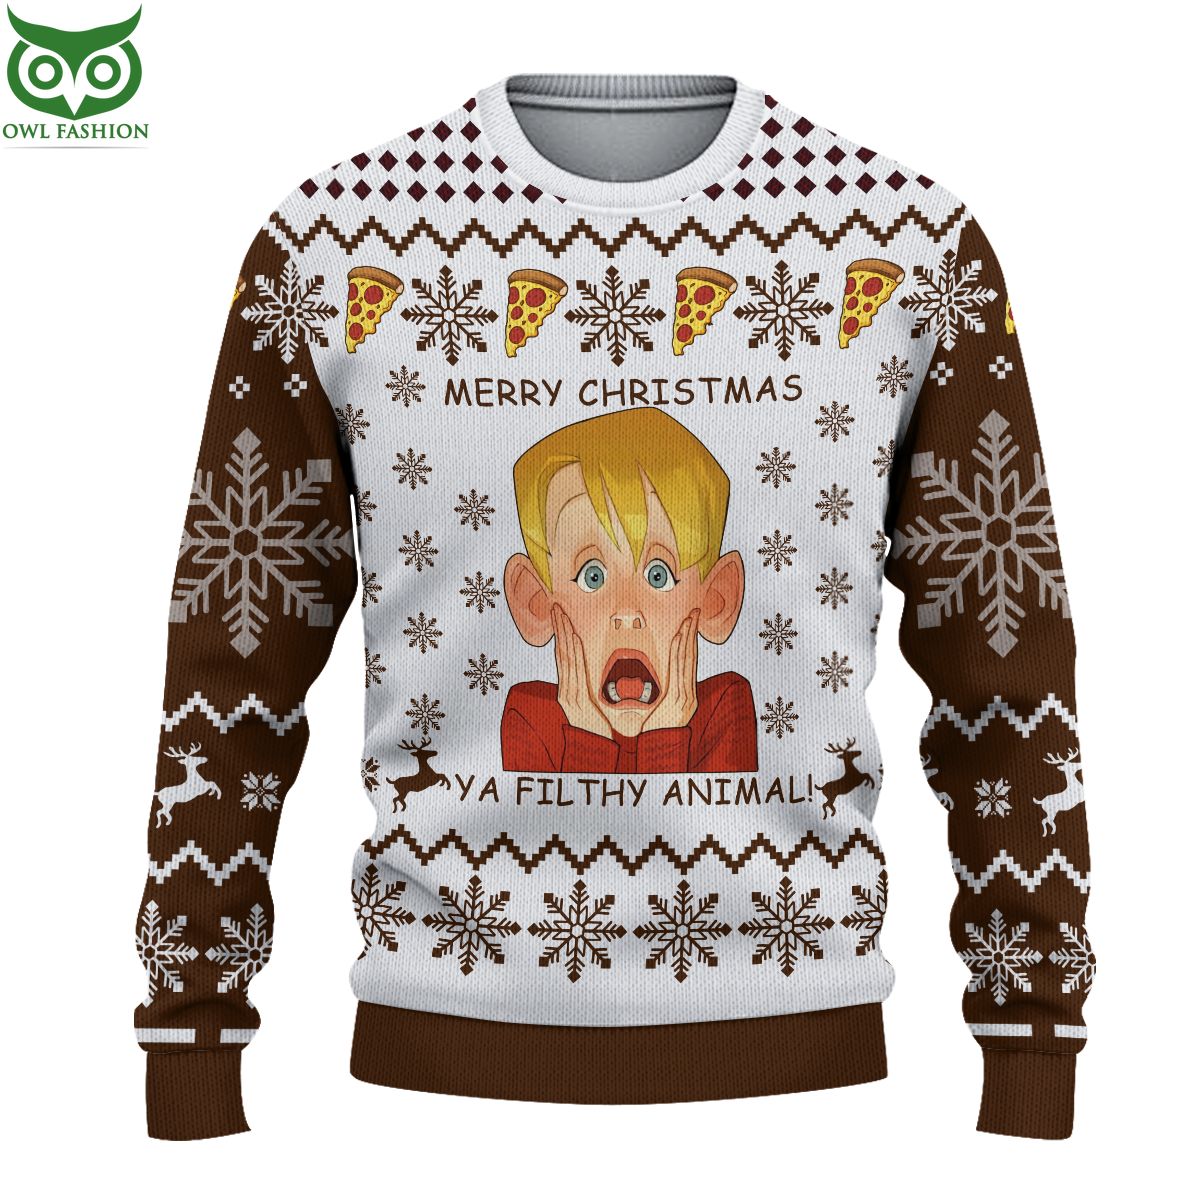 Home Alone Christmas Sweater Jumper Limited